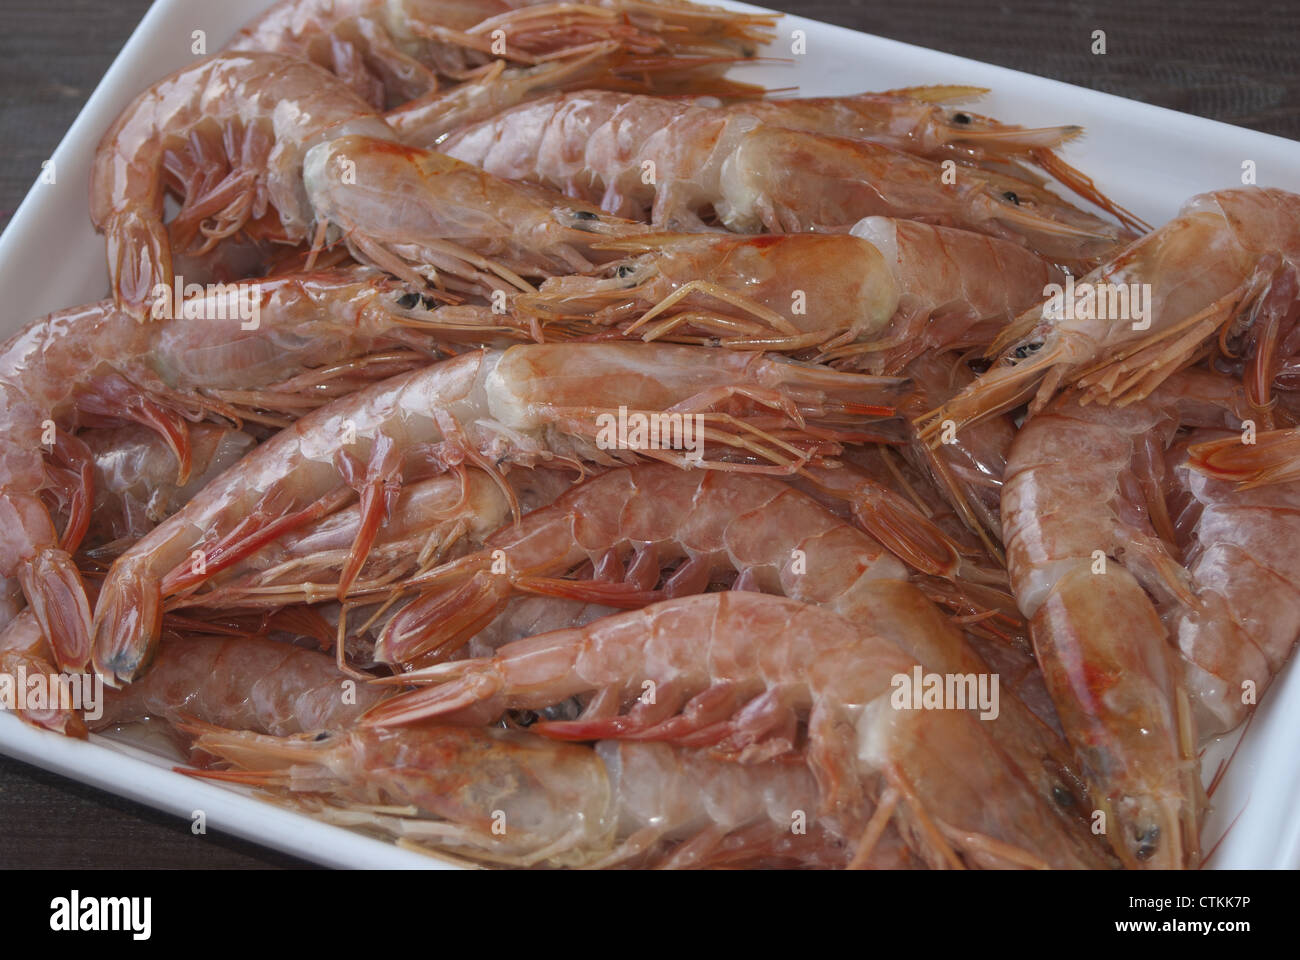 crustacea. king prawns, typical course of the Italian cuisine Stock Photo